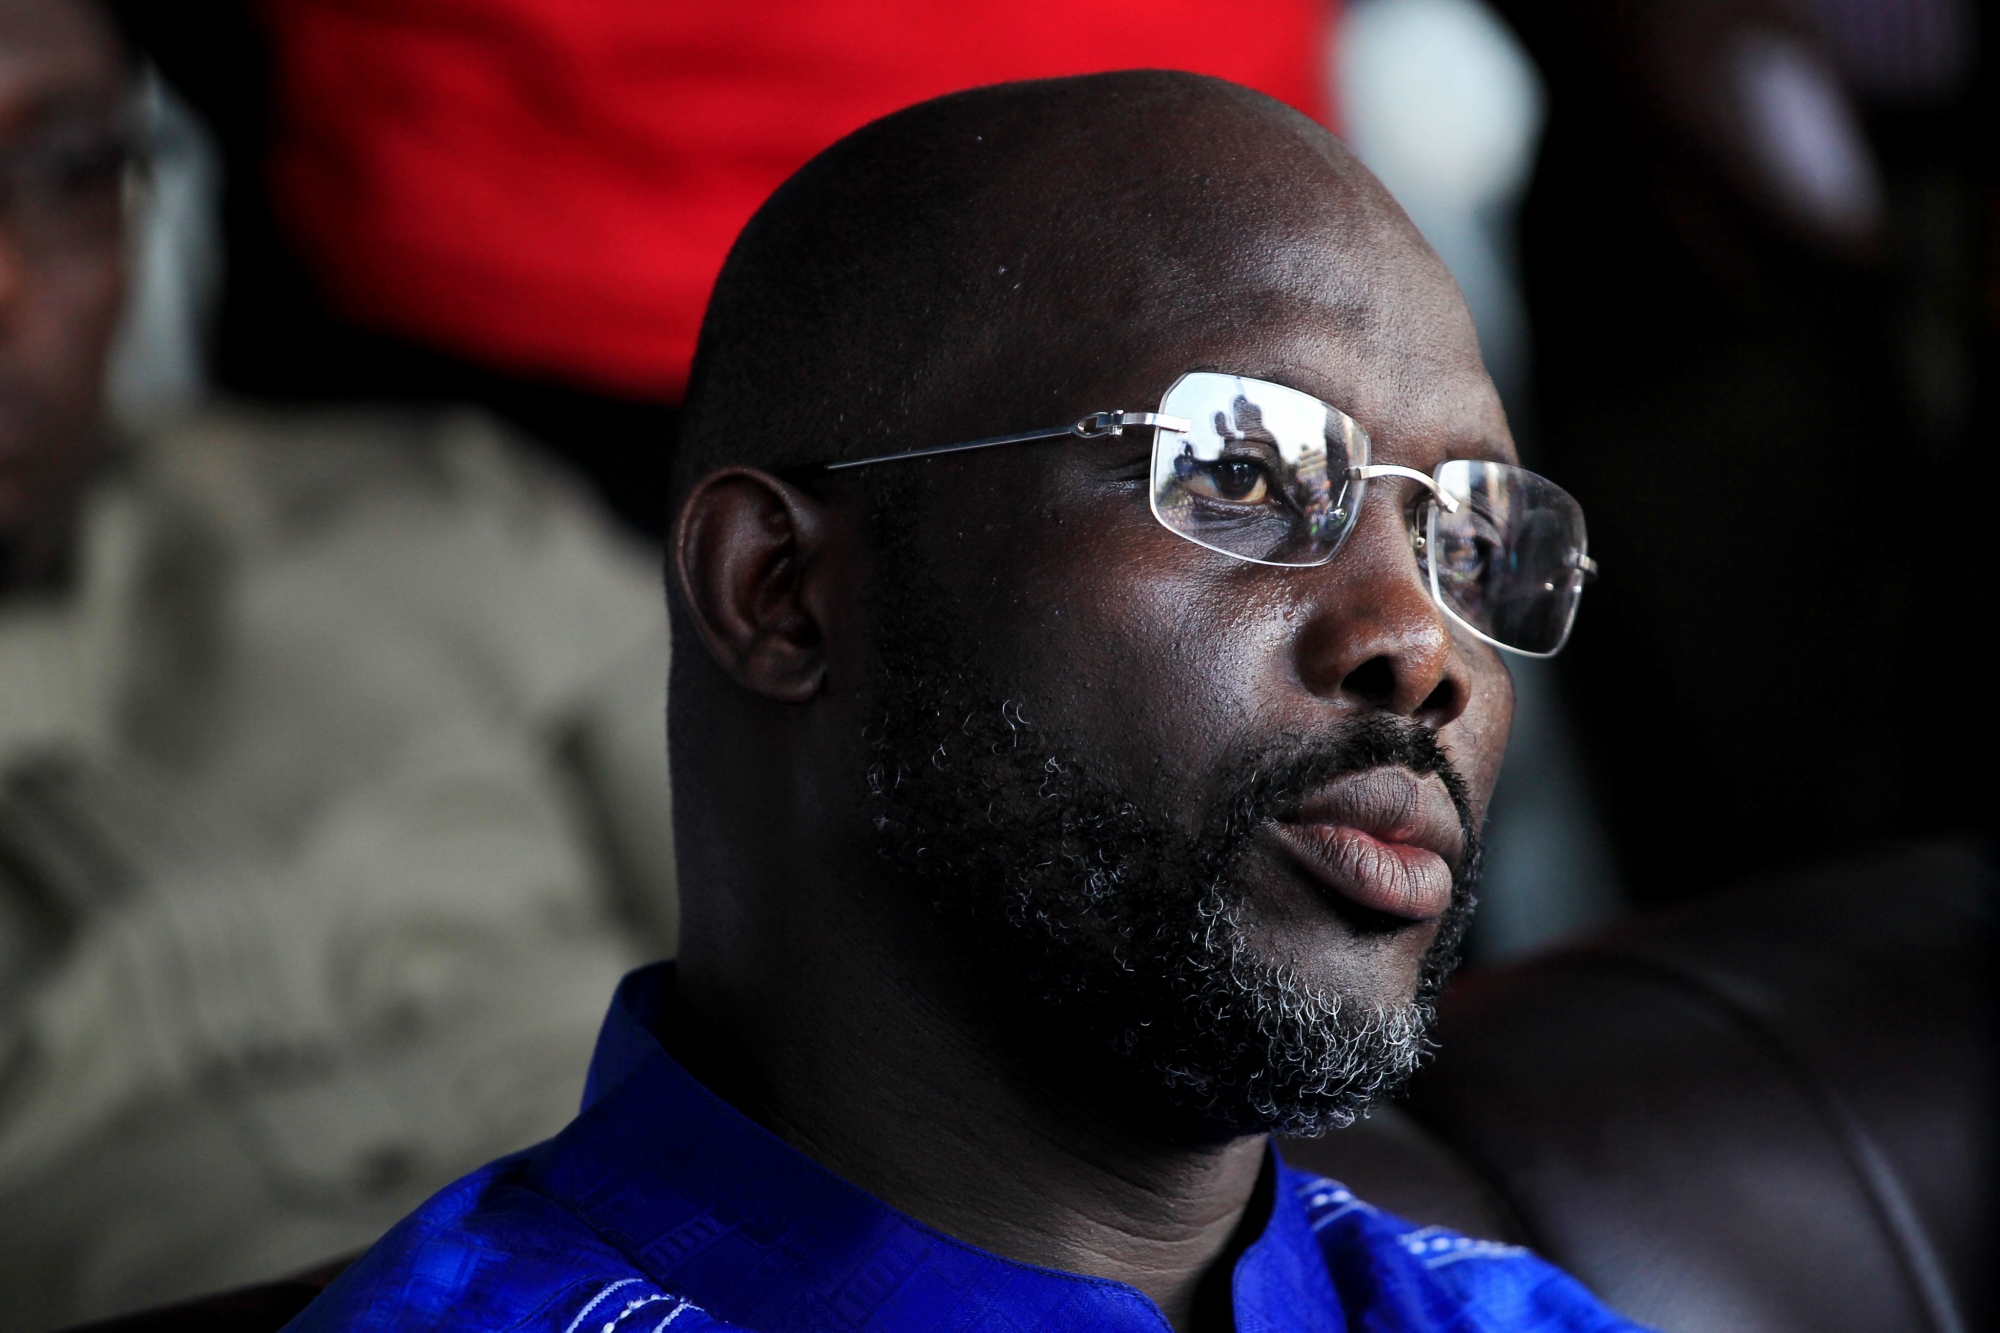 epa05281893 Former Liberian soccer player and current Senator George Weah addresses thousands of supporters of the Congress for Democratic Change (CDC) party who petitioned him to contest Liberia's Presidential elections in 2017, at Party headquarters in Monrovia, Liberia, 28 April 2016. George Weah contested the 2005 and 2011 Presidential elections, but lost to incumbent Ellen Johnson Sirleaf on both occasions. Sirleaf's second term in office will end in 2017.  EPA/AHMED JALLANZO LIBERIA WAHLEN PRAESIDENT